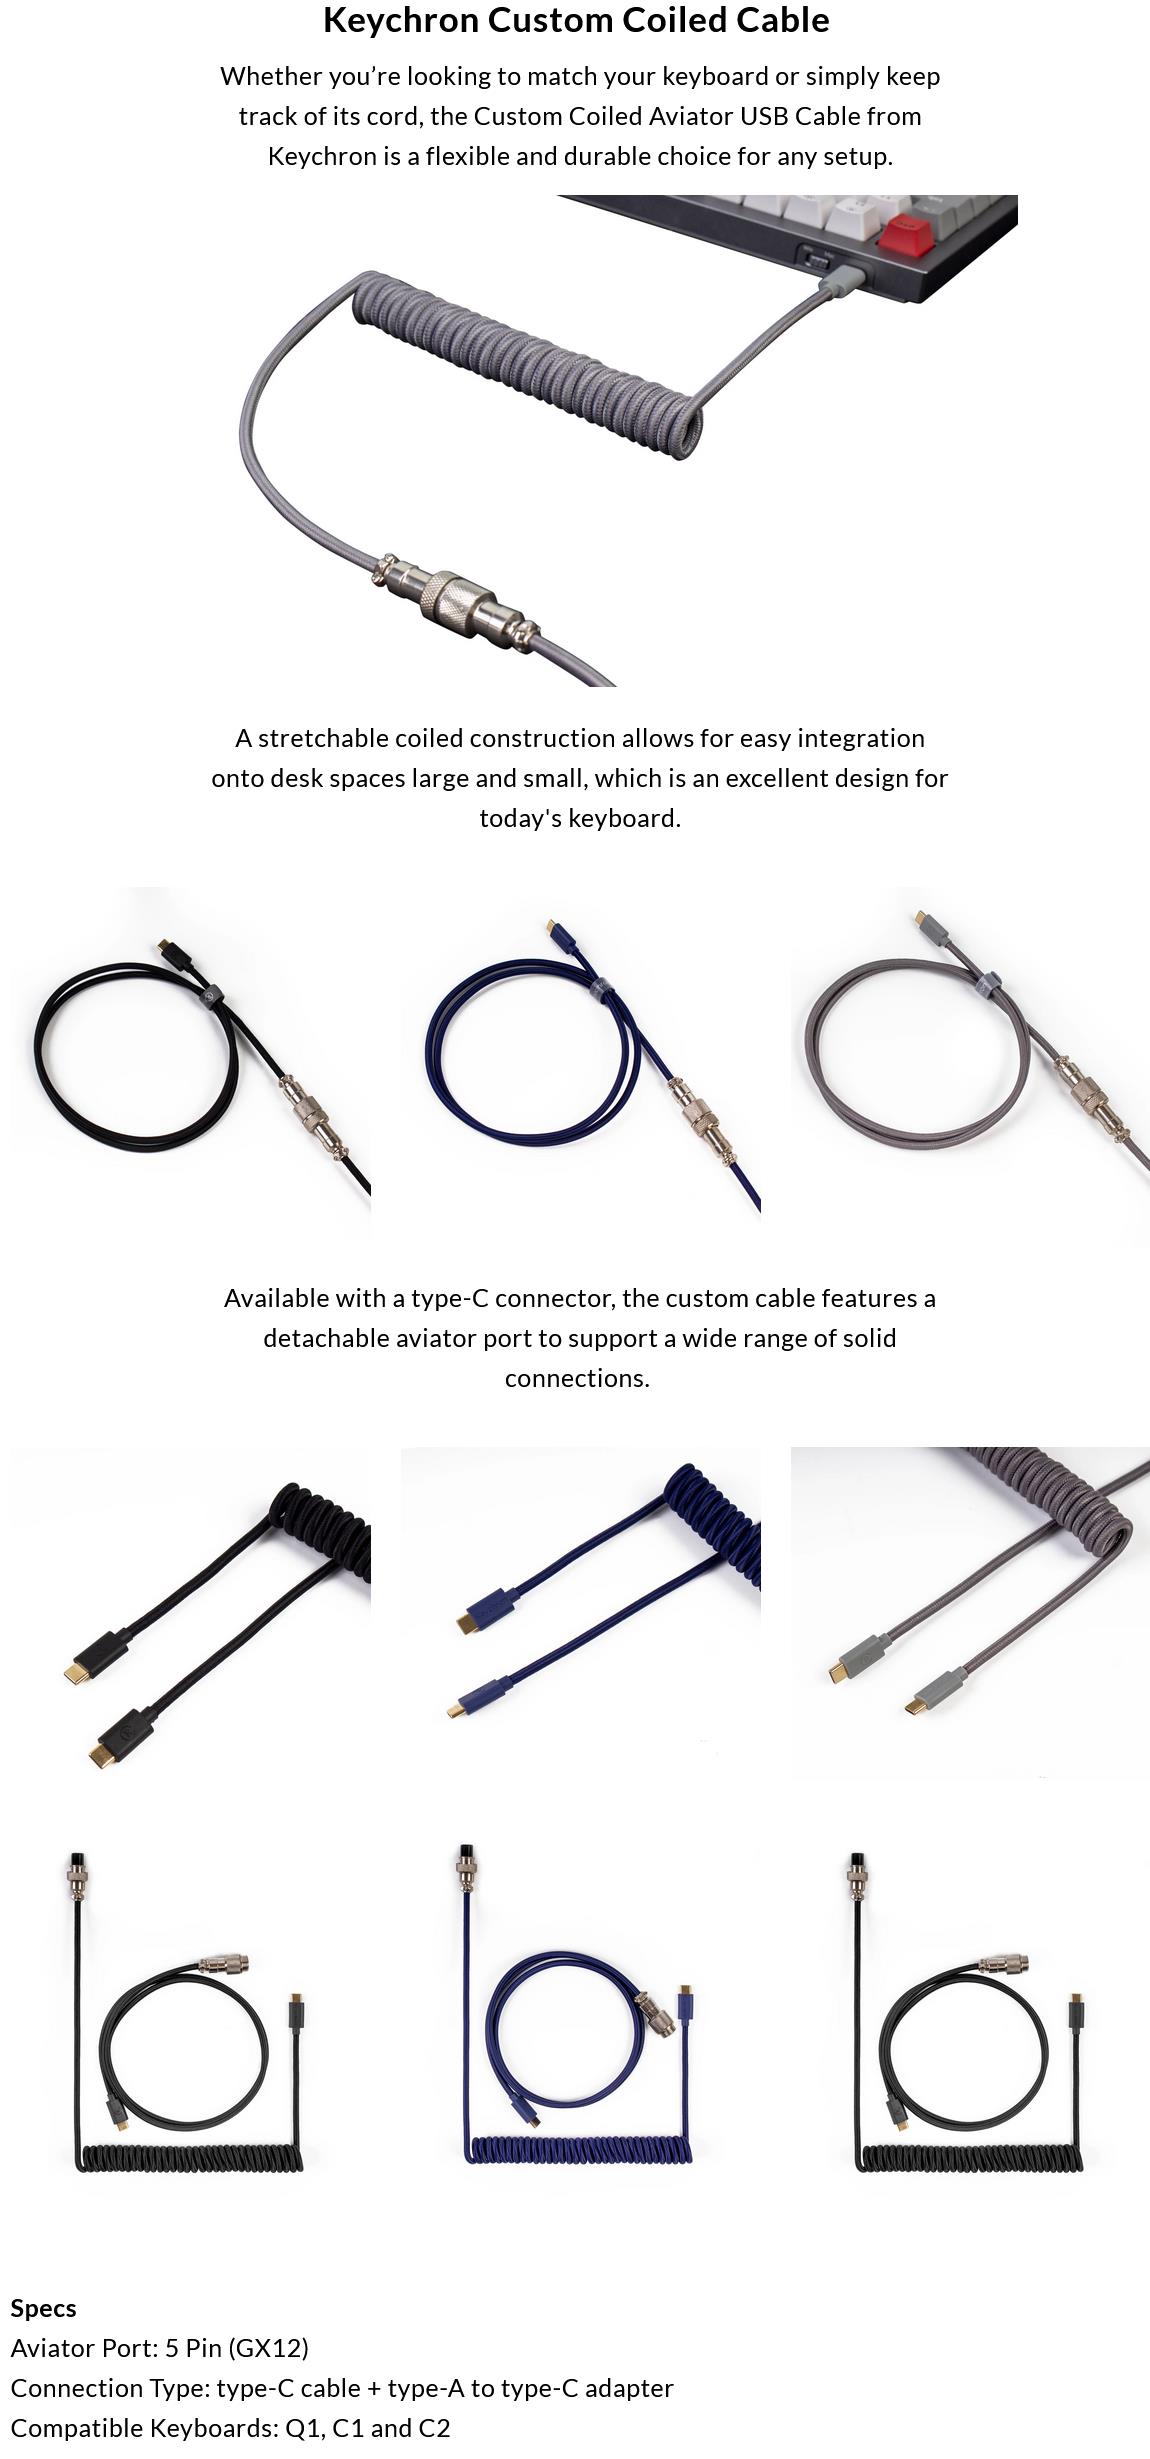 A large marketing image providing additional information about the product Keychron Custom Coiled Aviator Cable USB-C Cable with USB-A Adapter - Grey - Additional alt info not provided